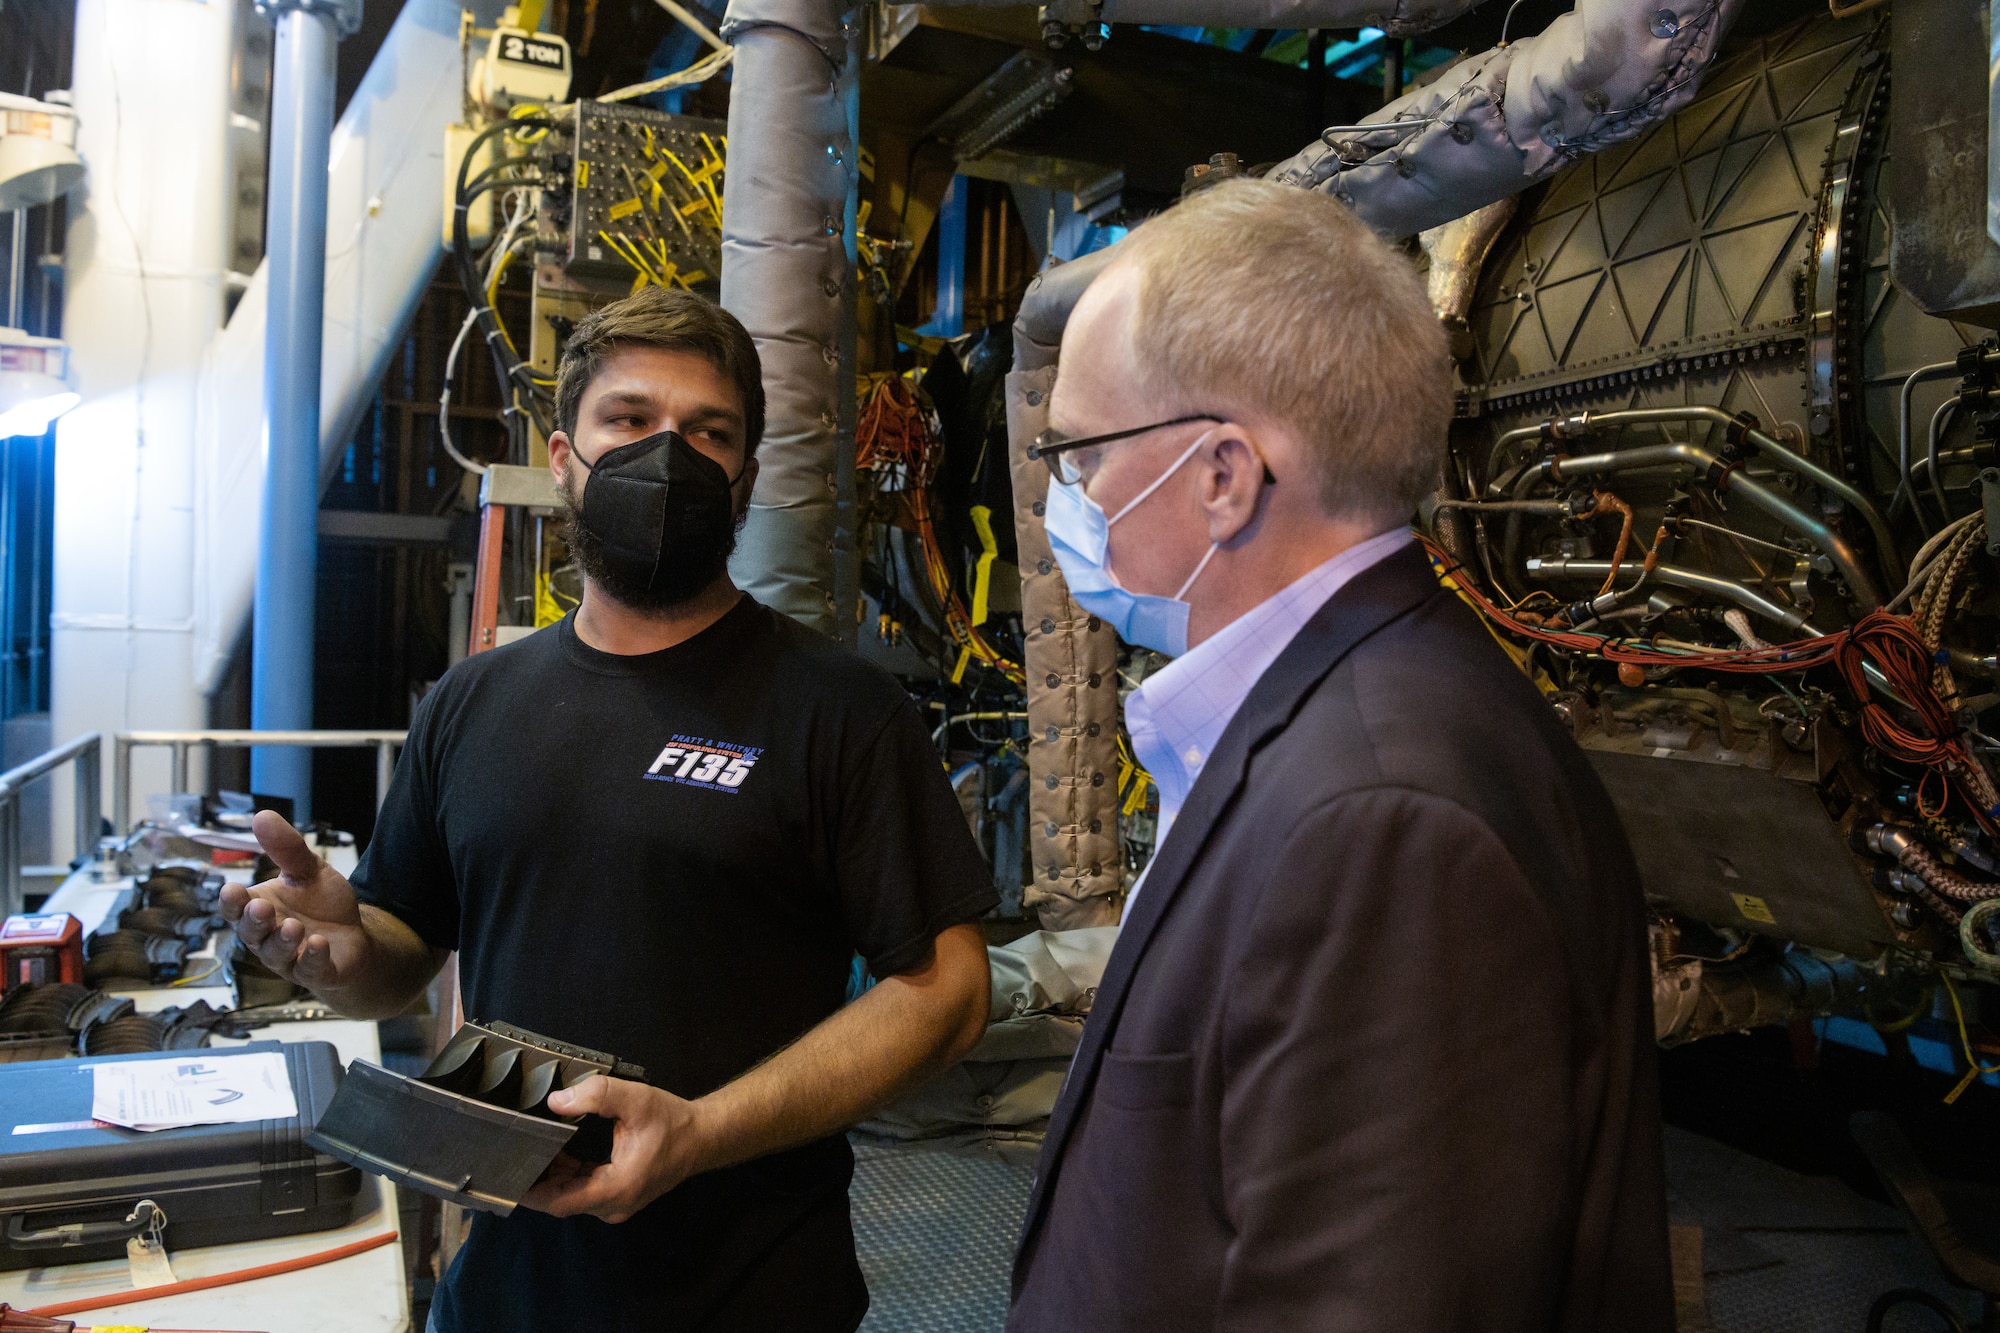 From left, Travis Vitale, a senior development mechanic with Pratt & Whitney, shows Rep. John Rose, of Tennessee, a section of a second stage fan stator for the F135 being tested to validate a new design of the engine component through accelerated mission testing in Sea Level Test Cell 3 (SL-3) as Rose tours the facility during his visit Aug. 31, 2021, to Arnold Air Force Base, Tenn., headquarters of Arnold Engineering Development Complex. Pratt & Whitney is the manufacturer of the F135, the powerhouse of the F-35 Joint Strike Fighter. Engine test facilities, such as those at Arnold AFB, allow new engine components to be rigorously tested and proven before being distributed to the fleet. (U.S. Air Force photo by Jill Pickett)